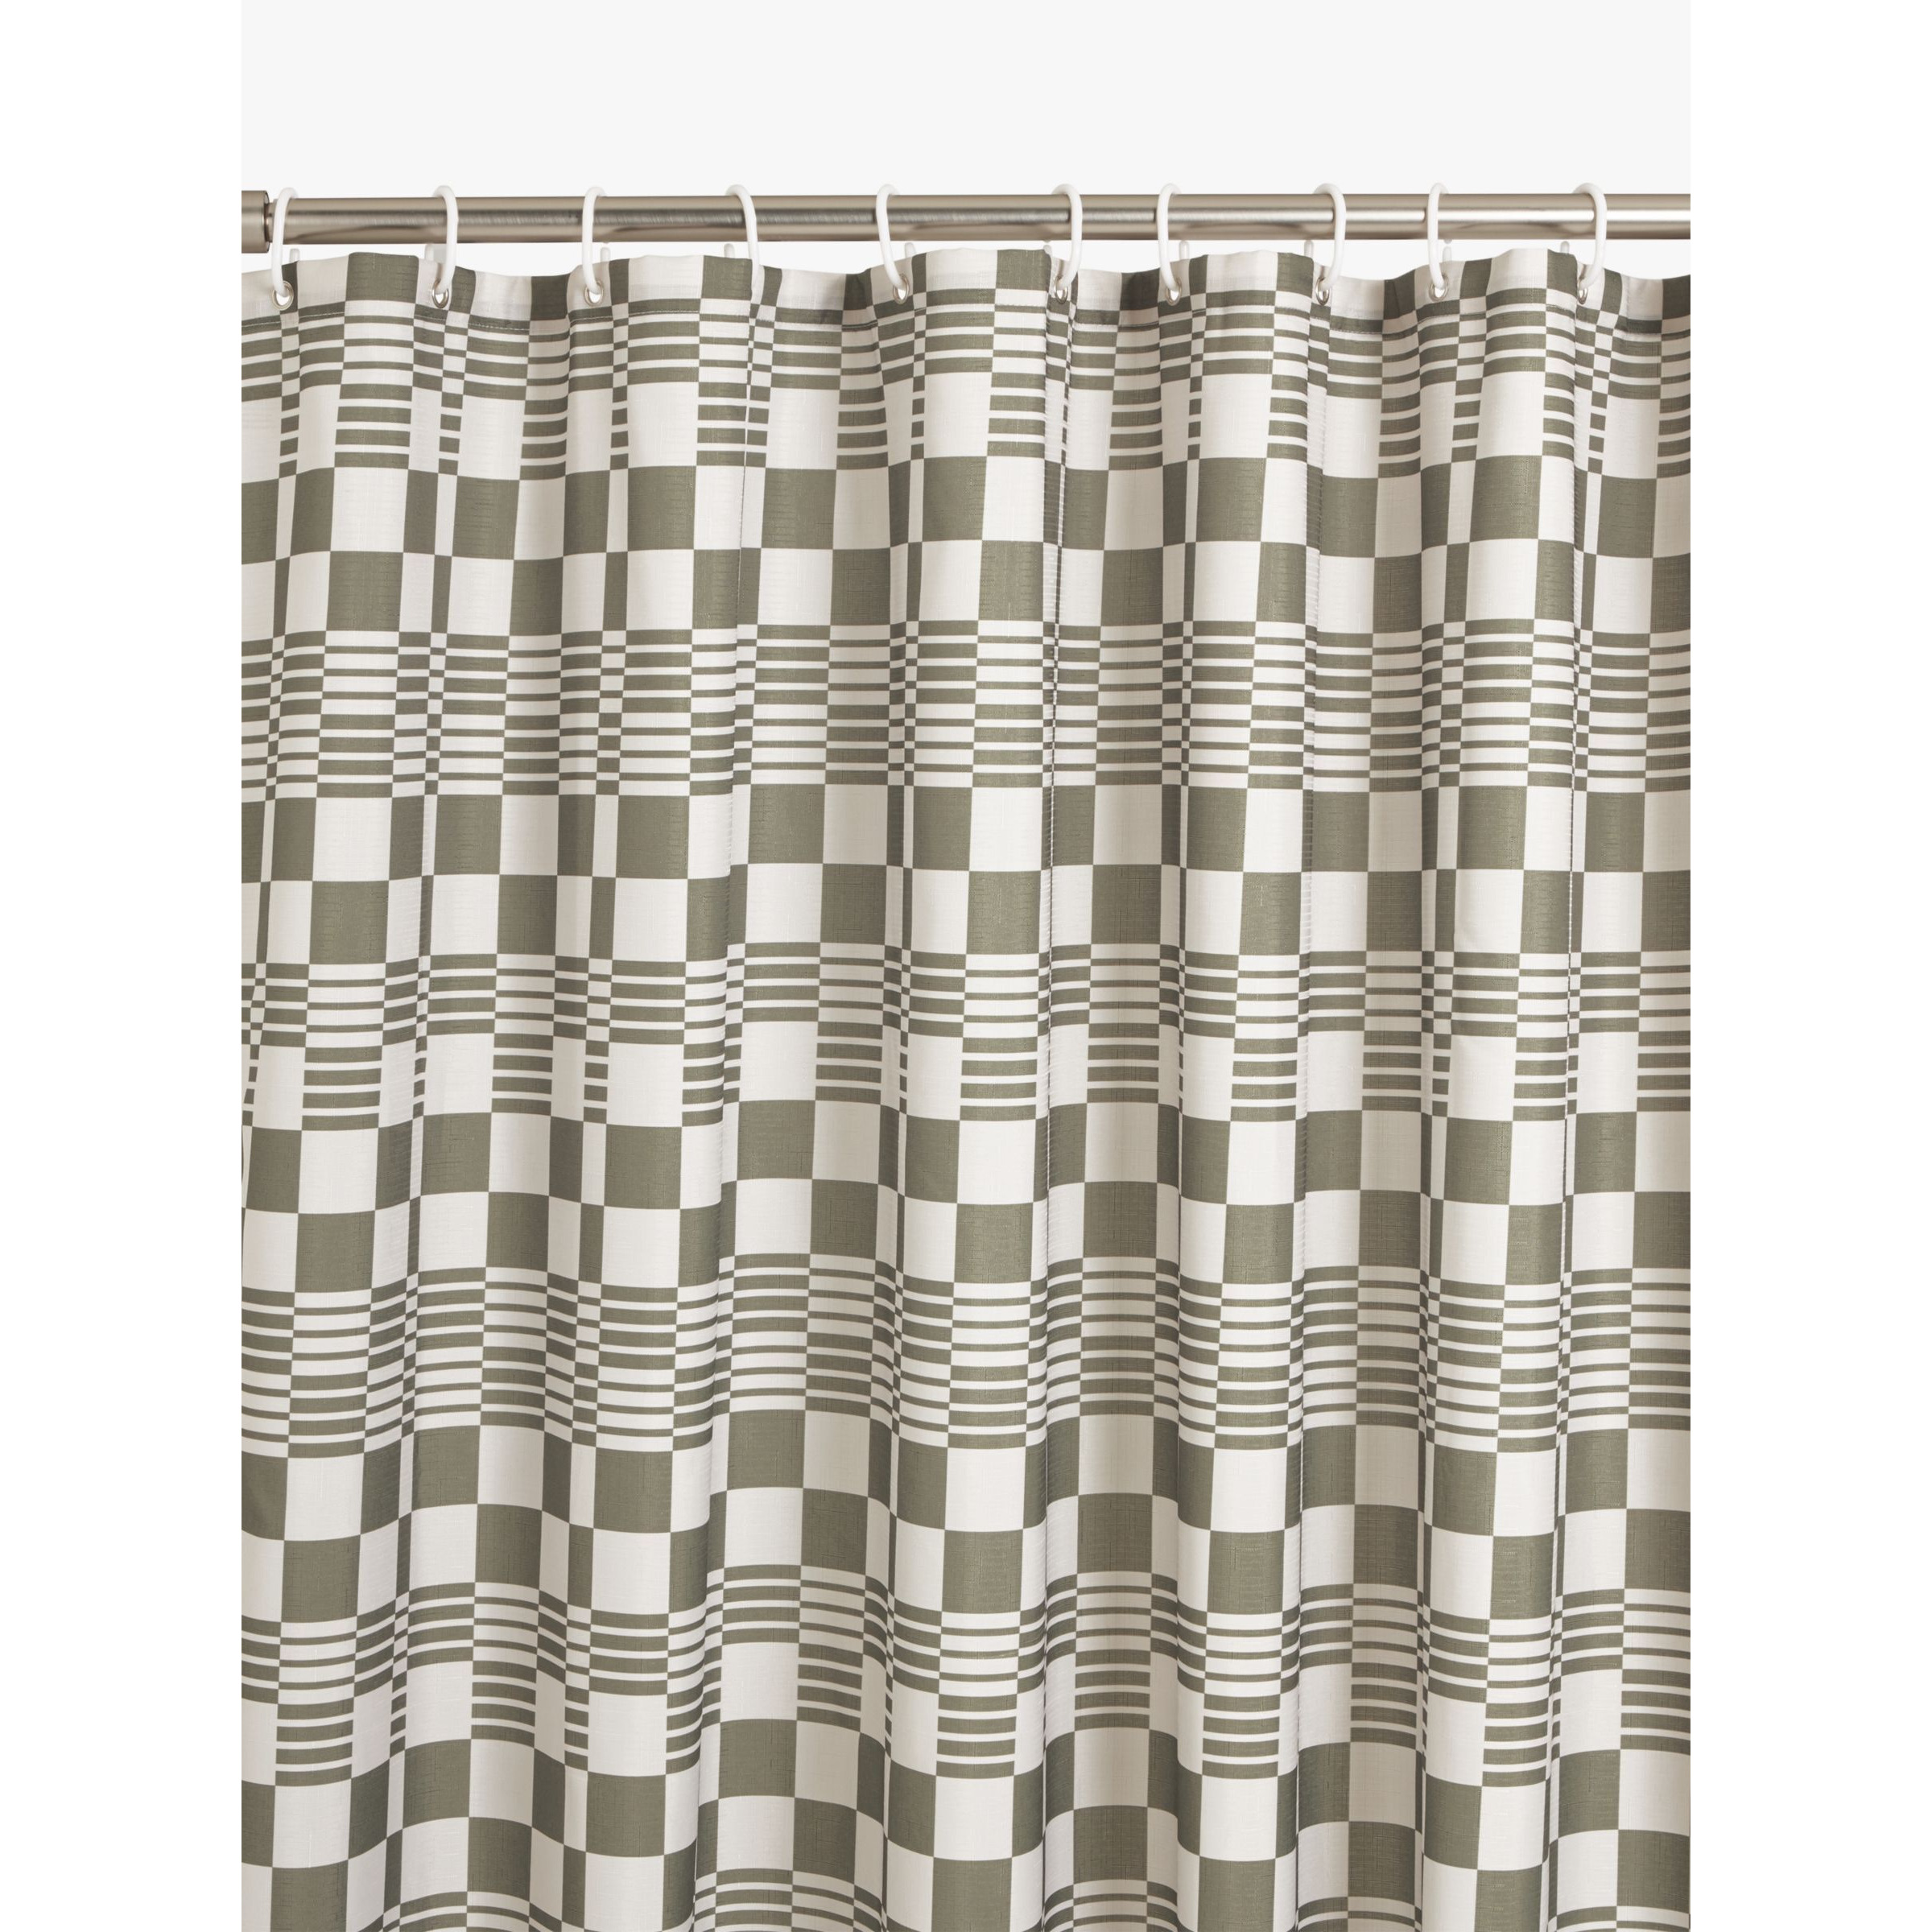 John Lewis Textured Checkerboard Recycled Polyester Shower Curtain, Sage - image 1